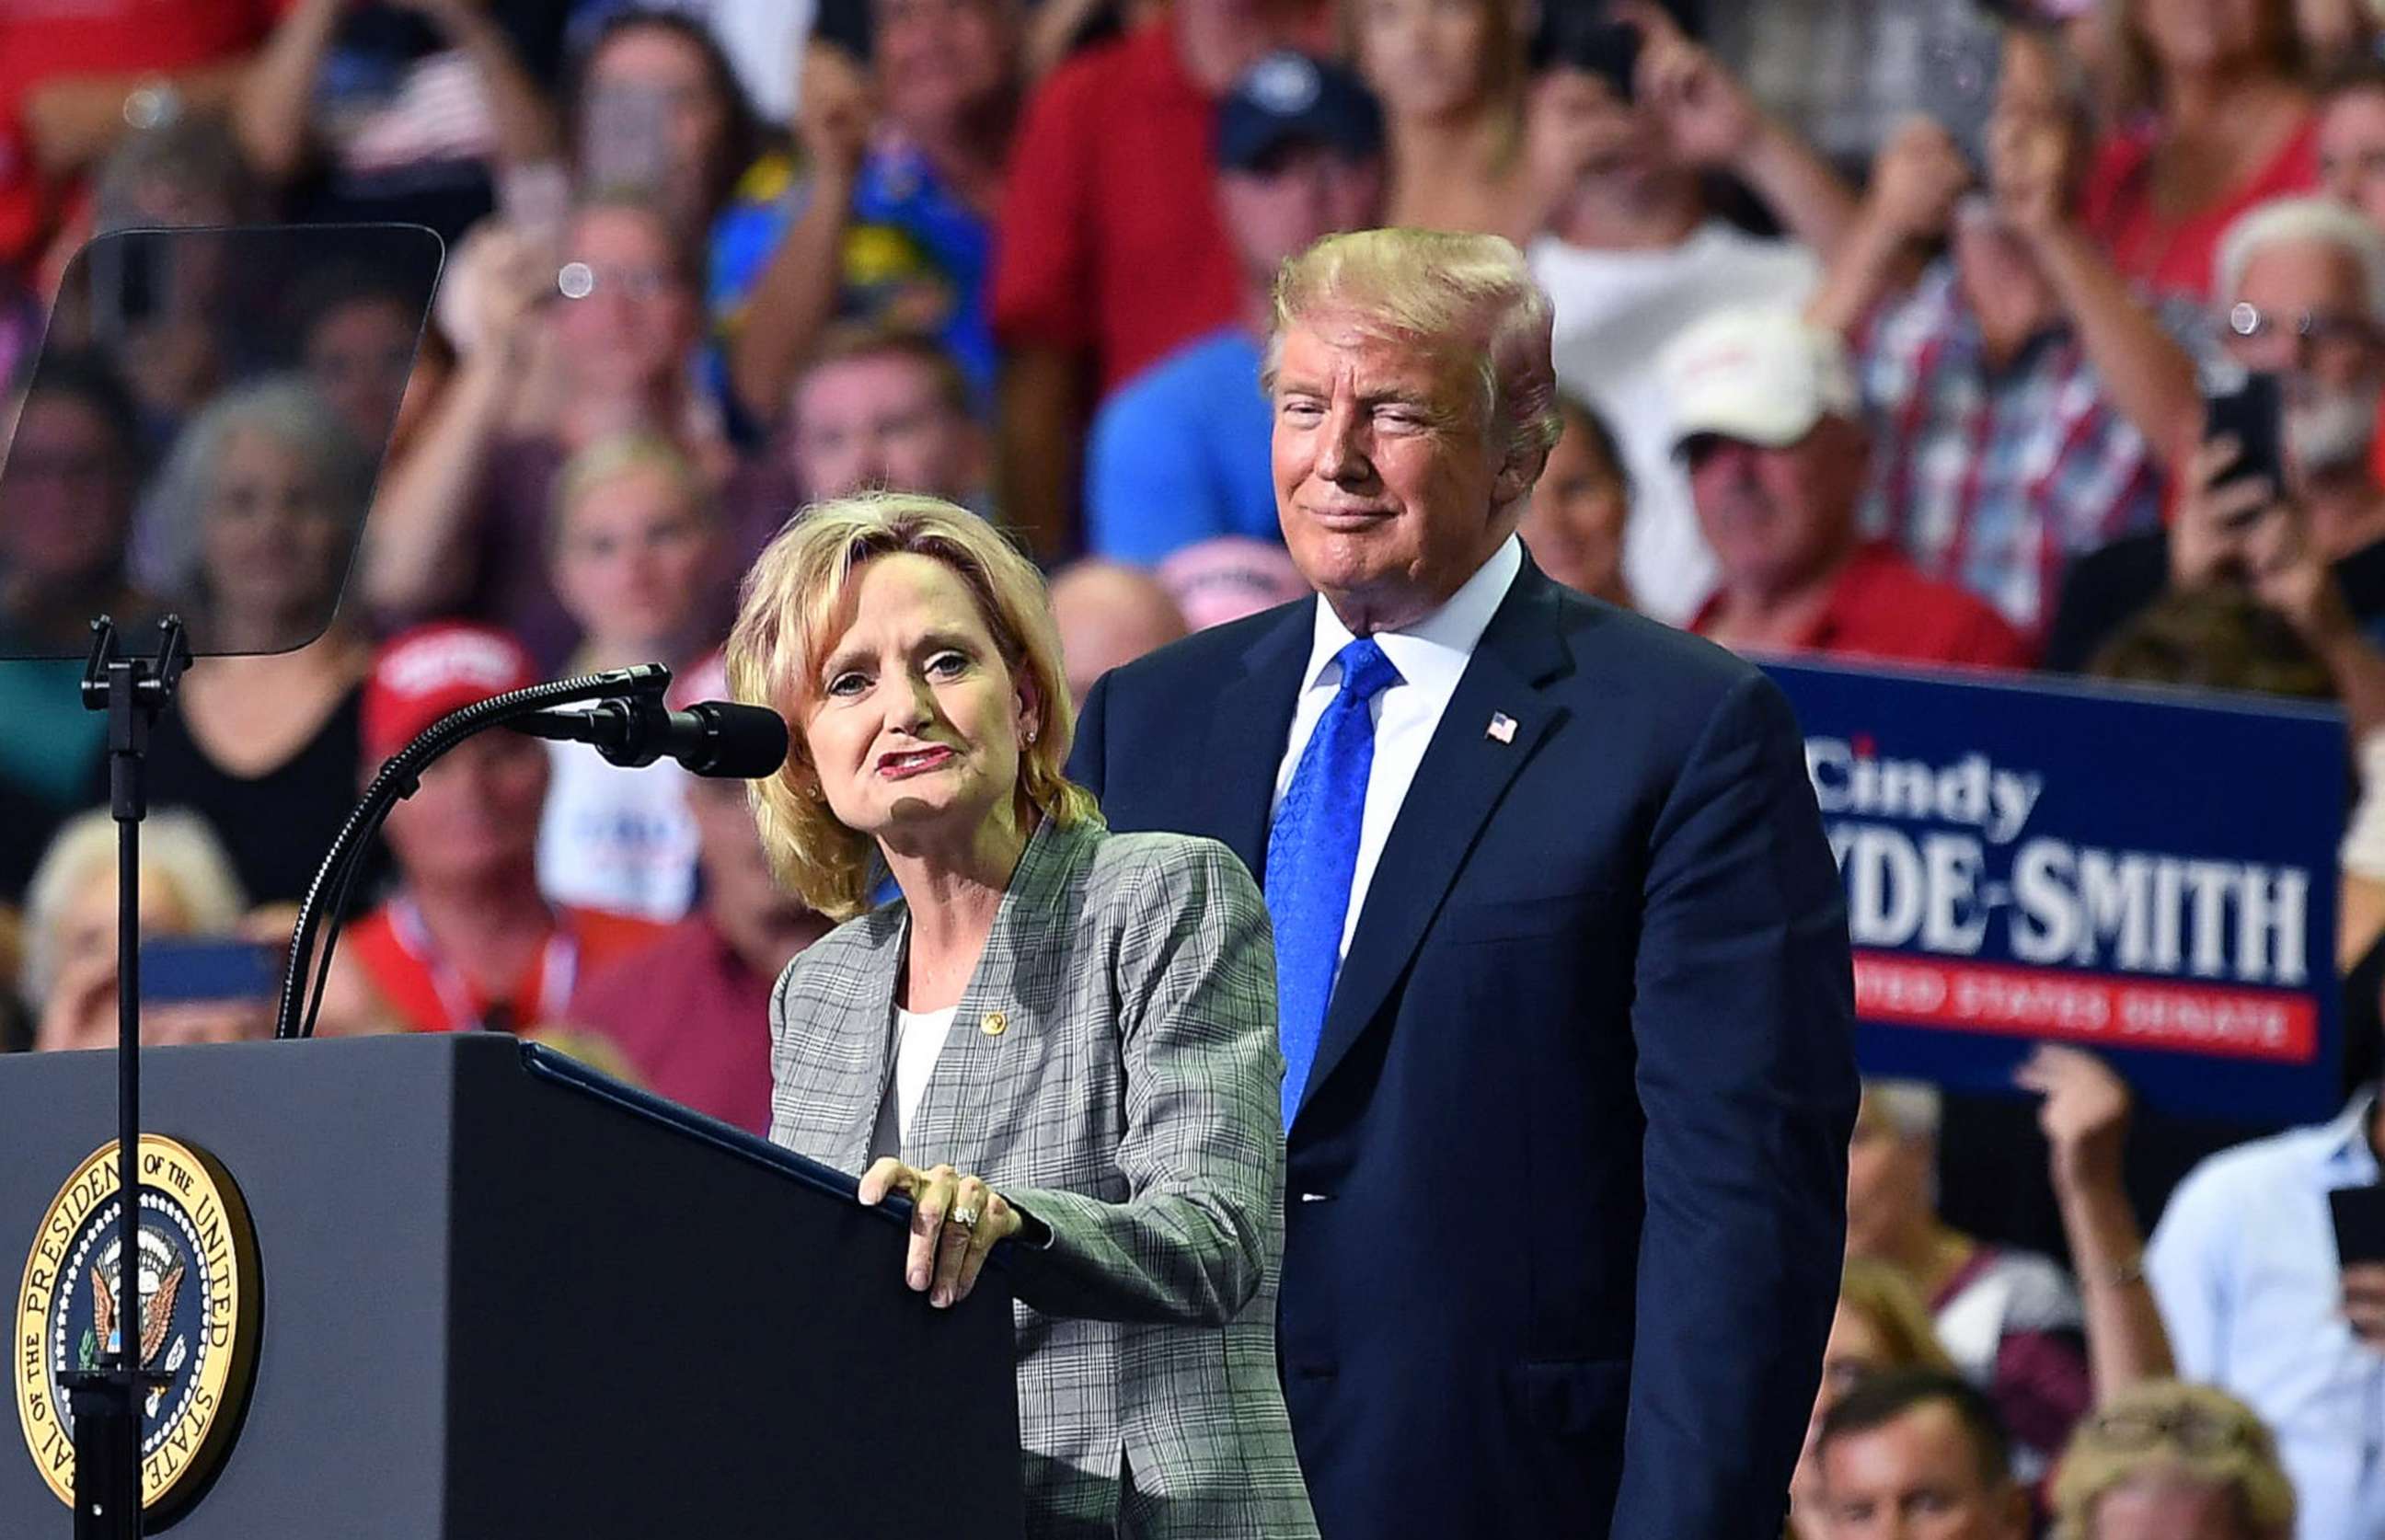 PHOTO: Senator Cindy Hyde-Smith takes the stage with President Donald Trump at a "Make America Great Again" rally at Landers Center in Southaven, Miss., on Oct. 2018.